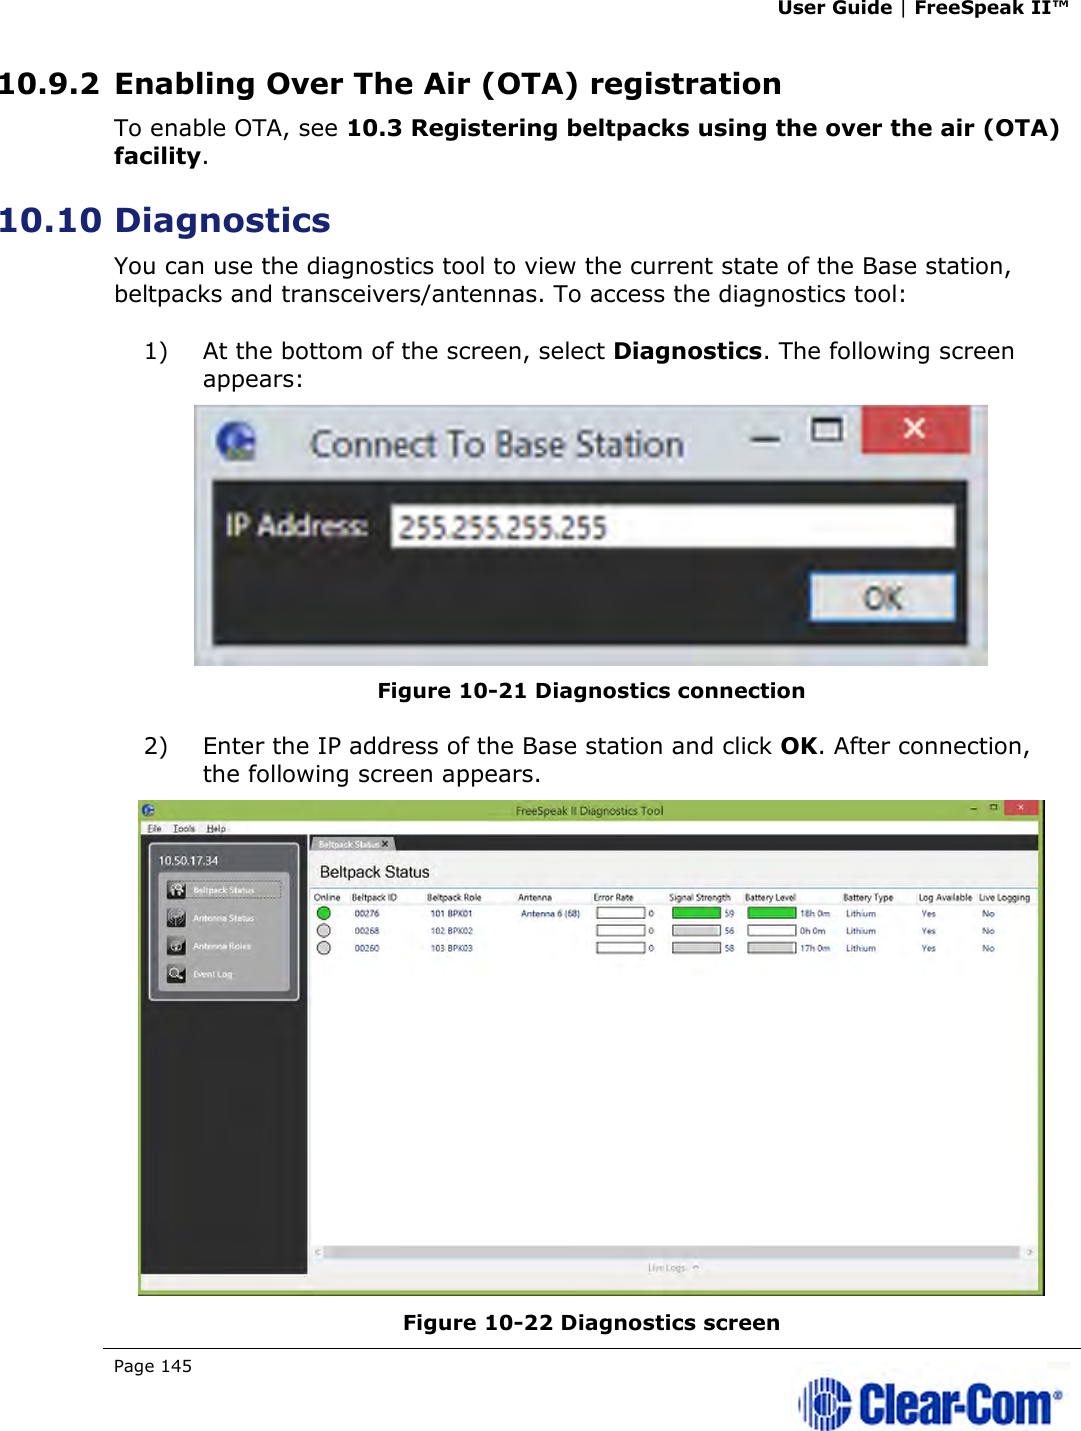 User Guide | FreeSpeak II™  Page 145   10.9.2 Enabling Over The Air (OTA) registration To enable OTA, see 10.3 Registering beltpacks using the over the air (OTA) facility. 10.10 Diagnostics You can use the diagnostics tool to view the current state of the Base station, beltpacks and transceivers/antennas. To access the diagnostics tool: 1) At the bottom of the screen, select Diagnostics. The following screen appears:  Figure 10-21 Diagnostics connection 2) Enter the IP address of the Base station and click OK. After connection, the following screen appears.  Figure 10-22 Diagnostics screen 